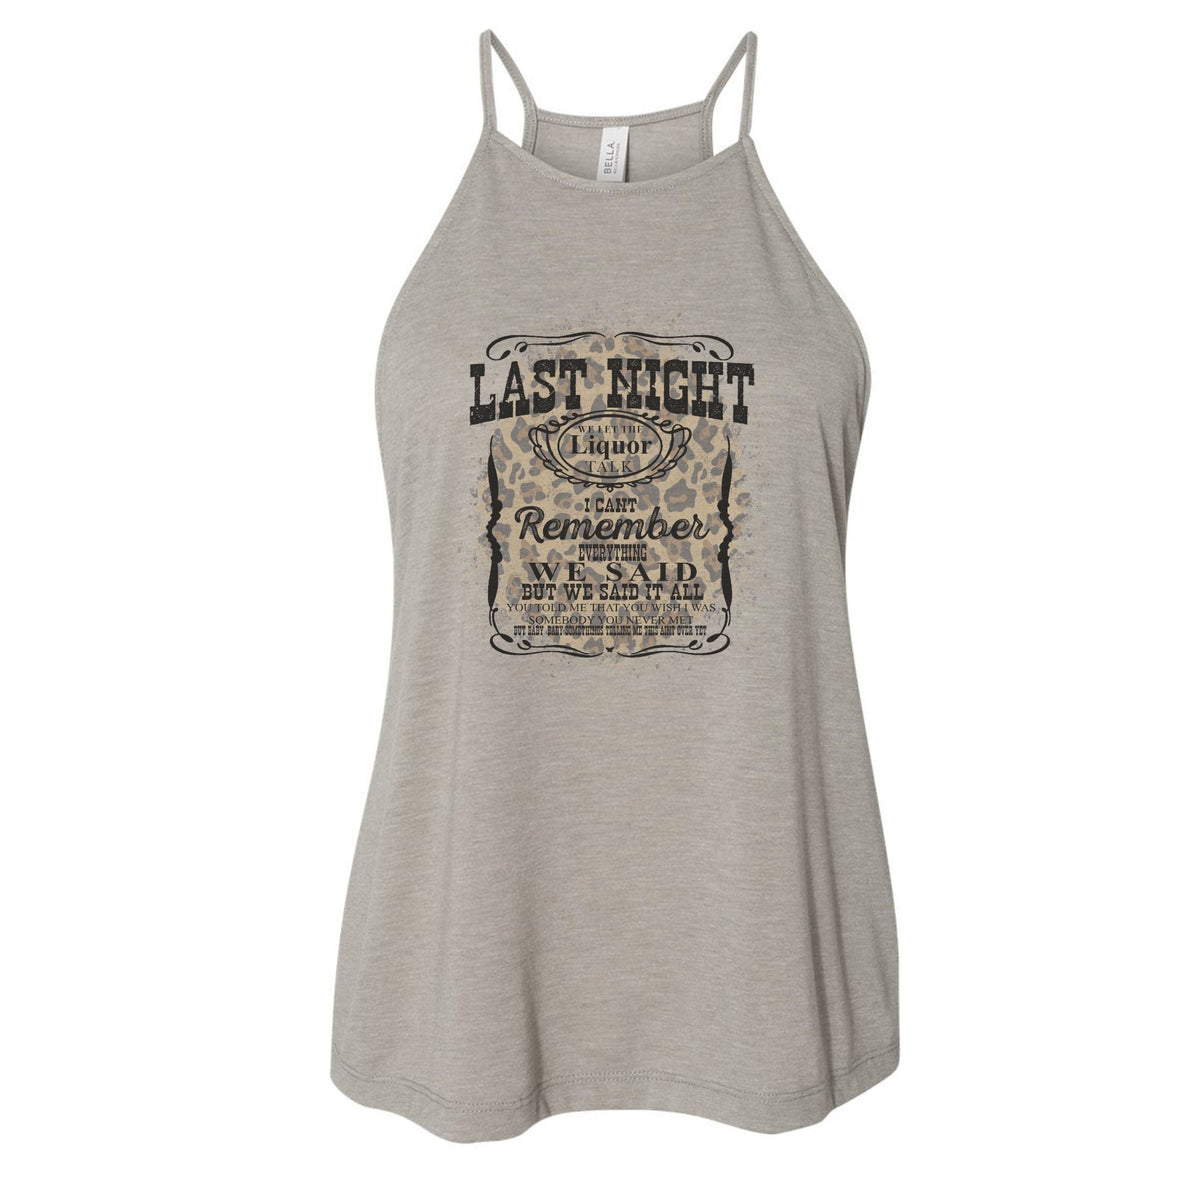 DON'T LET YESTERDAY TAKE UP TOO MUCH OF TODAY.' Women's Flowy Tank Top